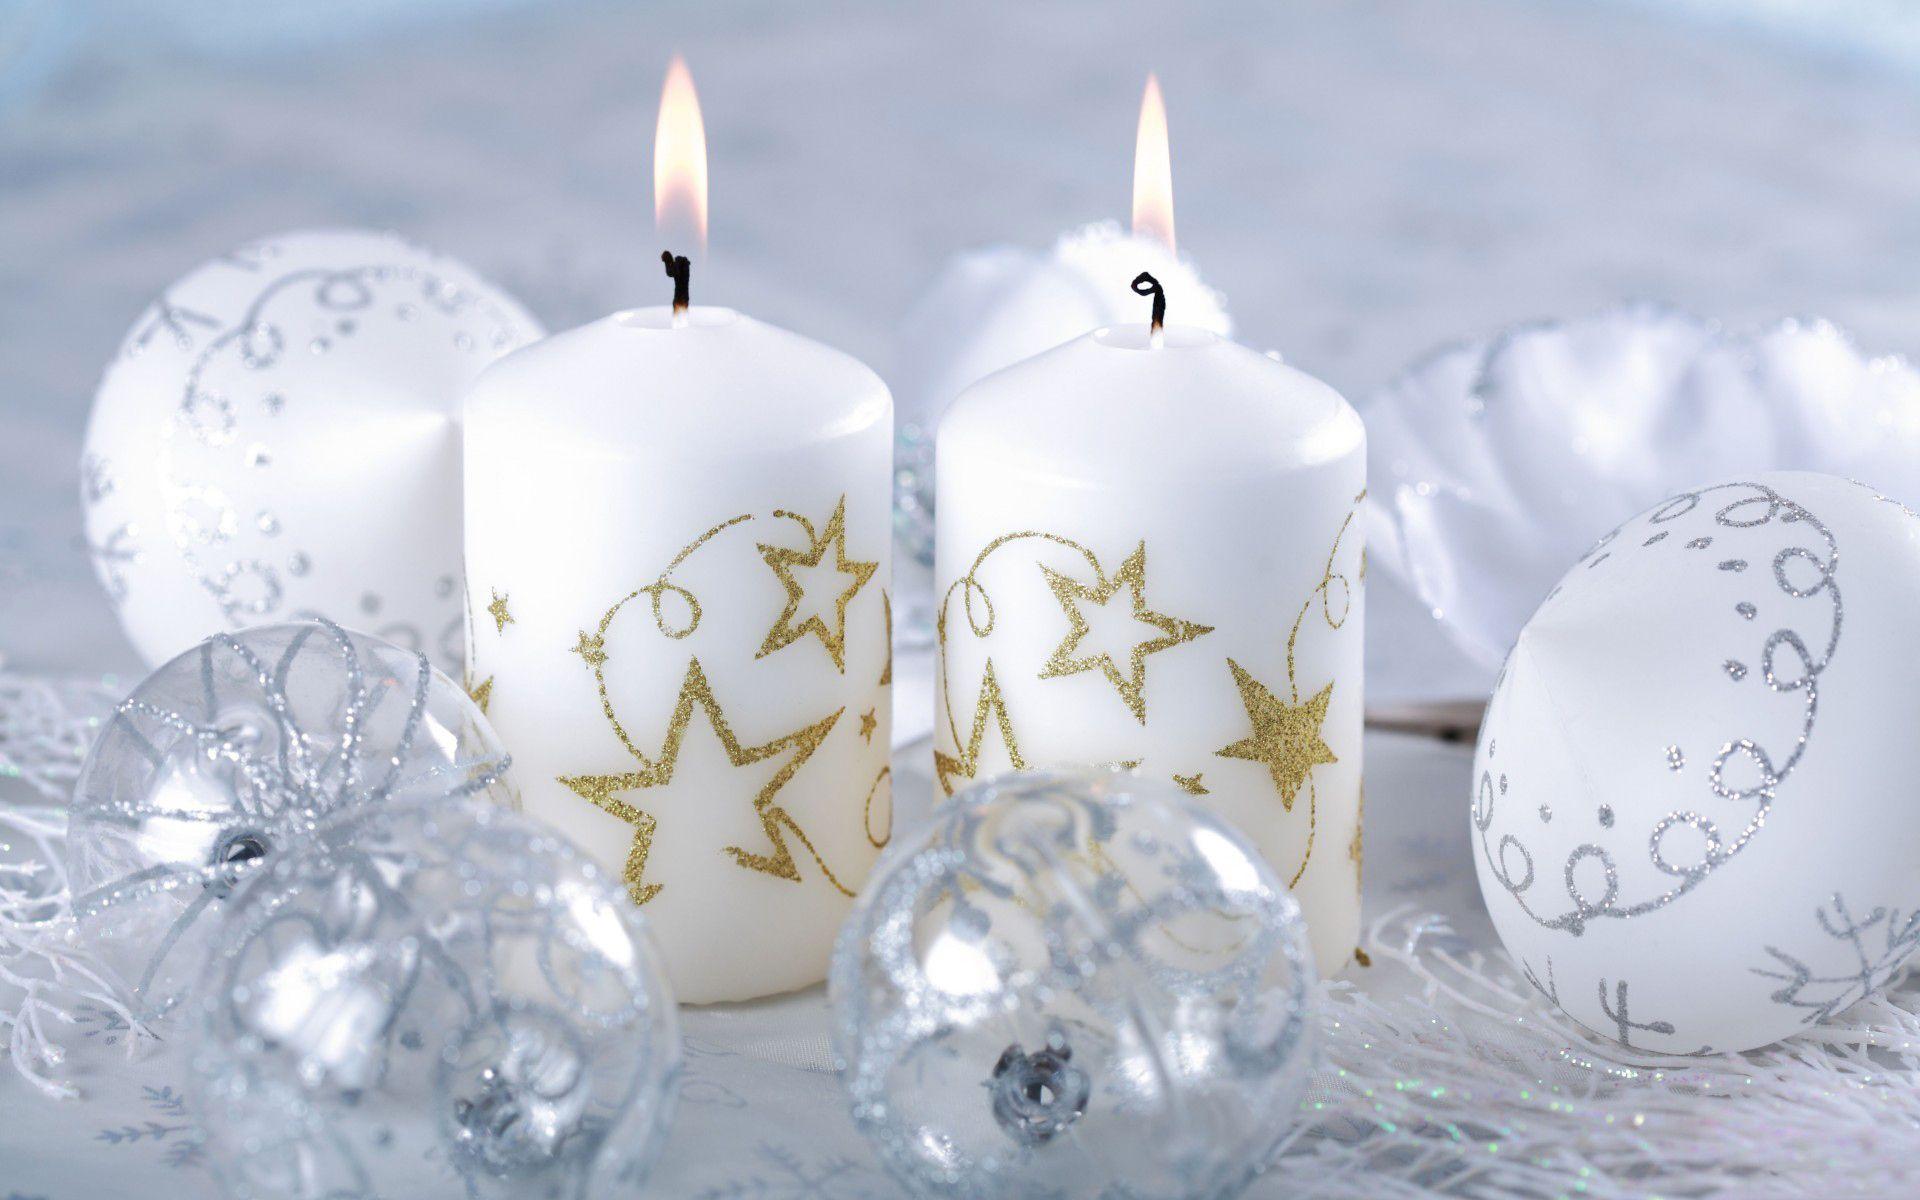 Free Holiday Candles Wallpaper 41090 1920x1200 px